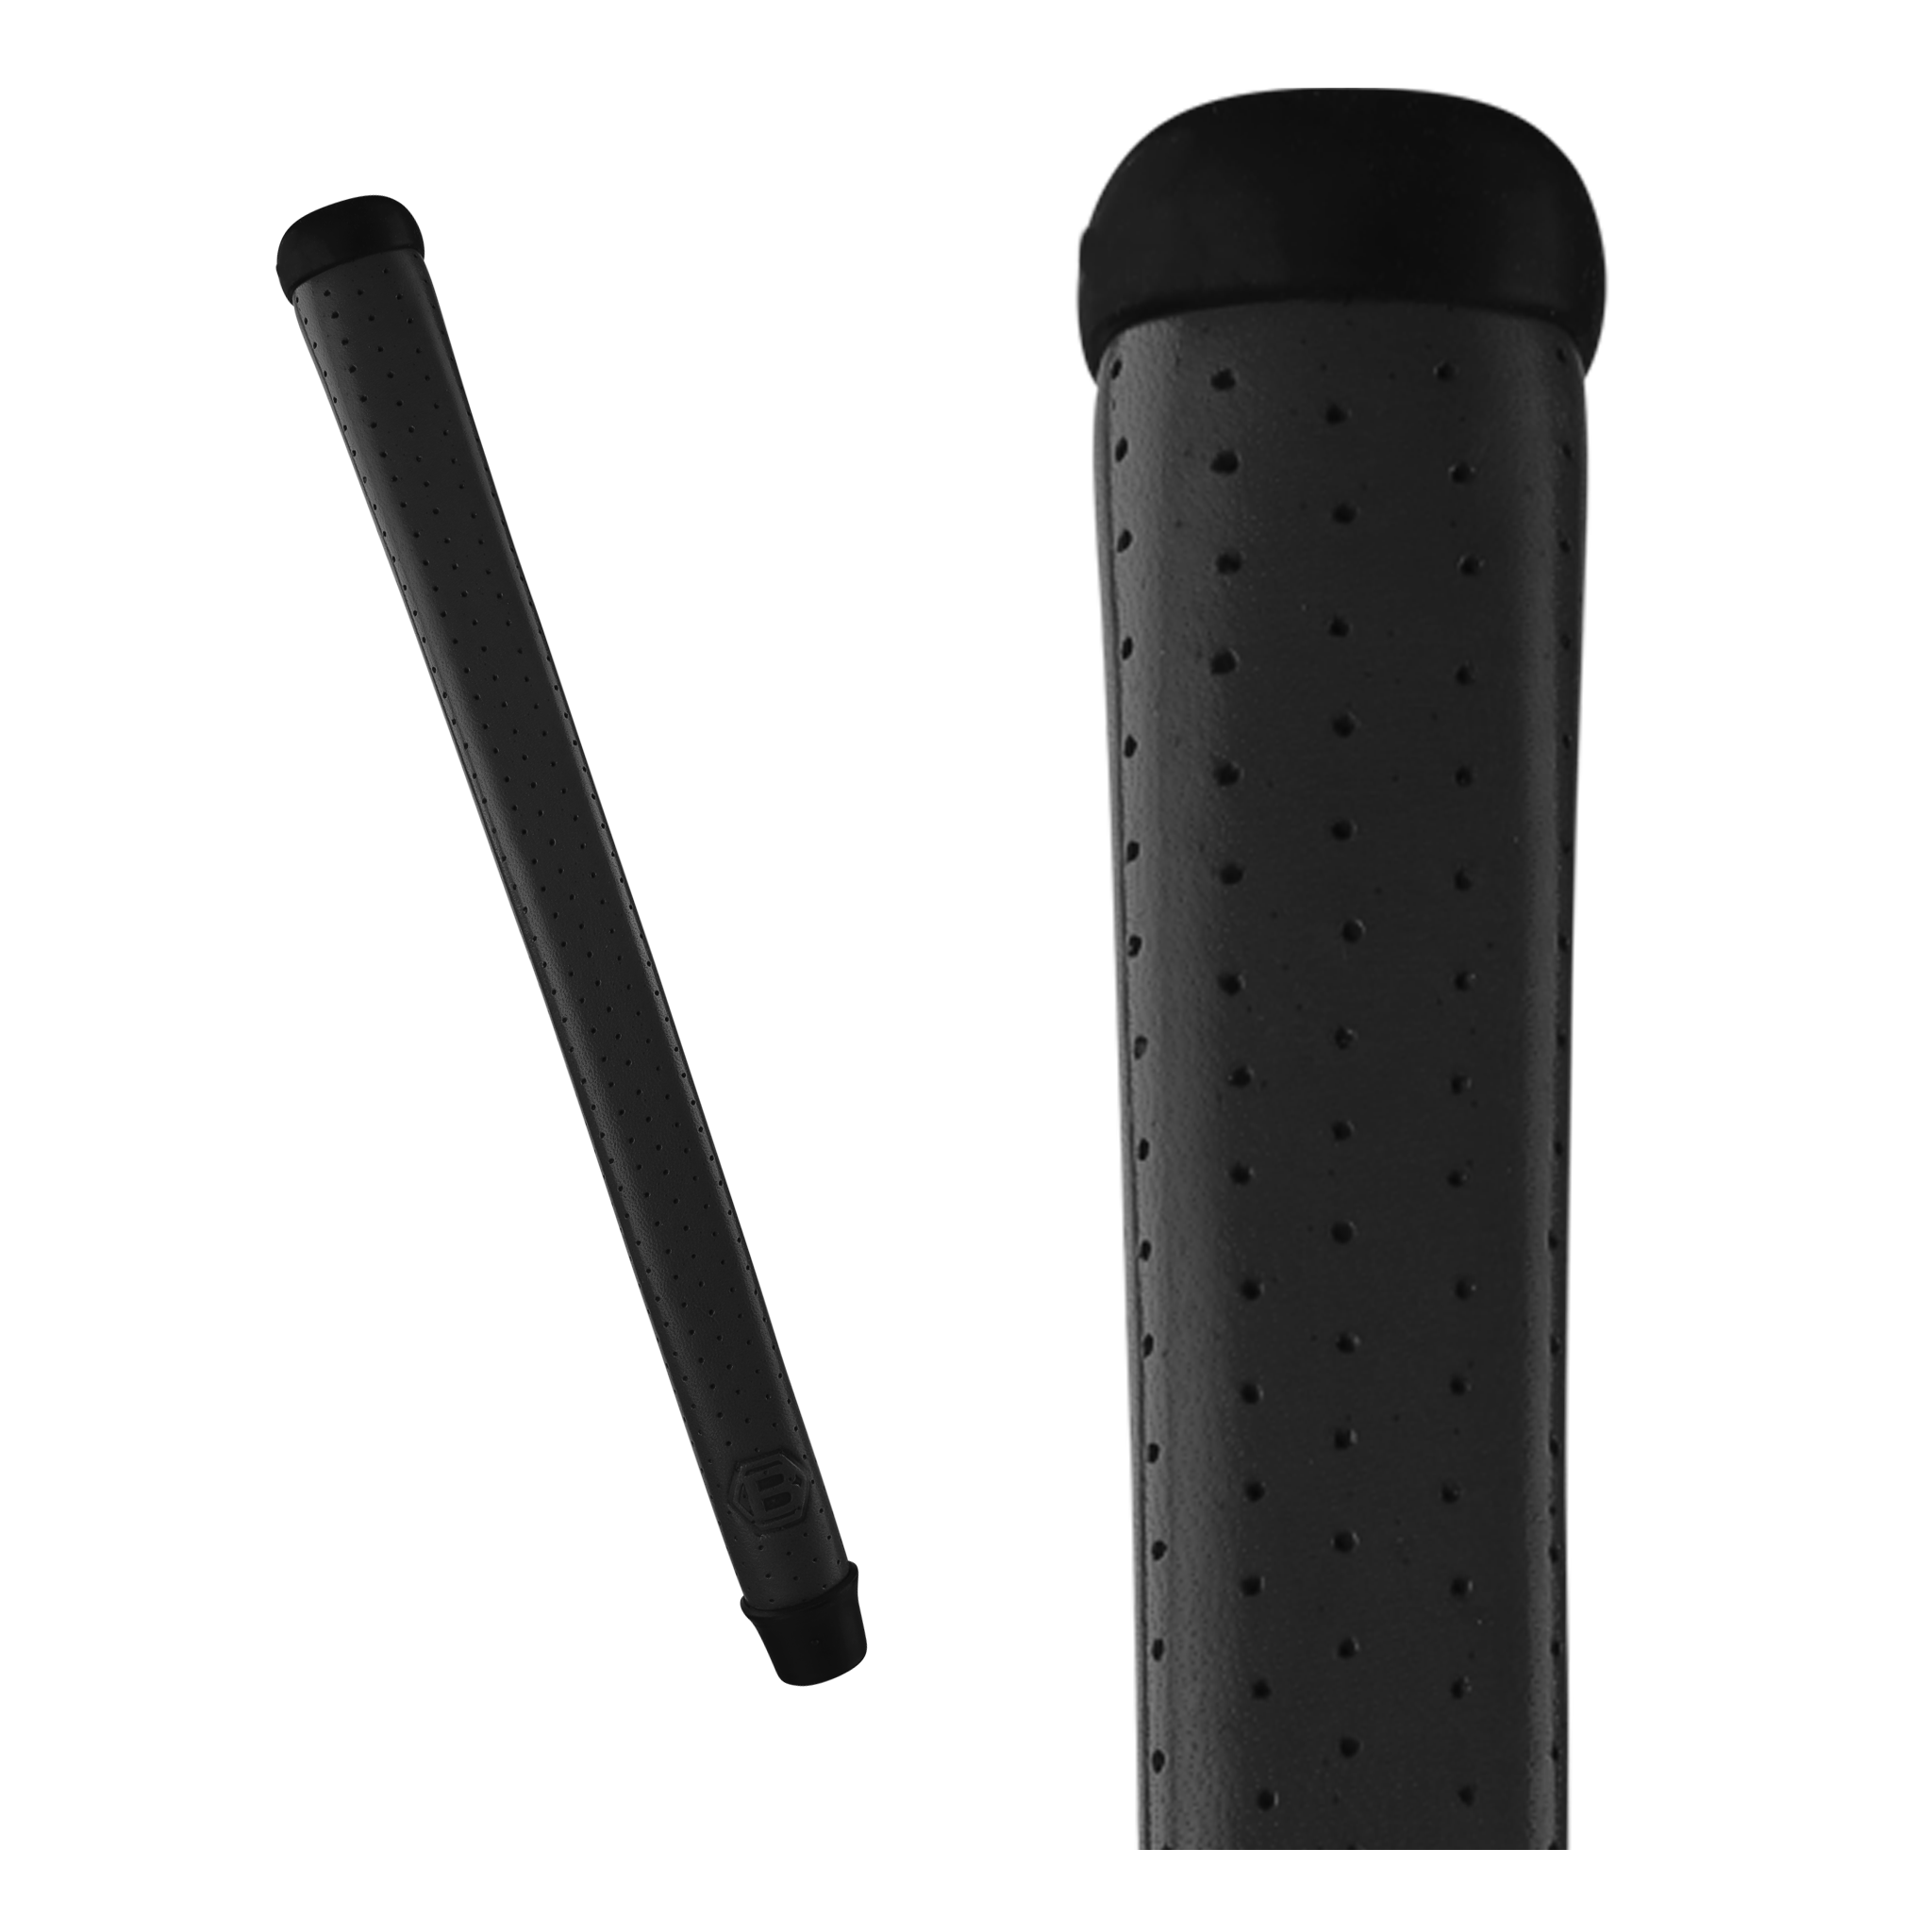 Hex B Gripmaster Perforated Leather Grip (Black)